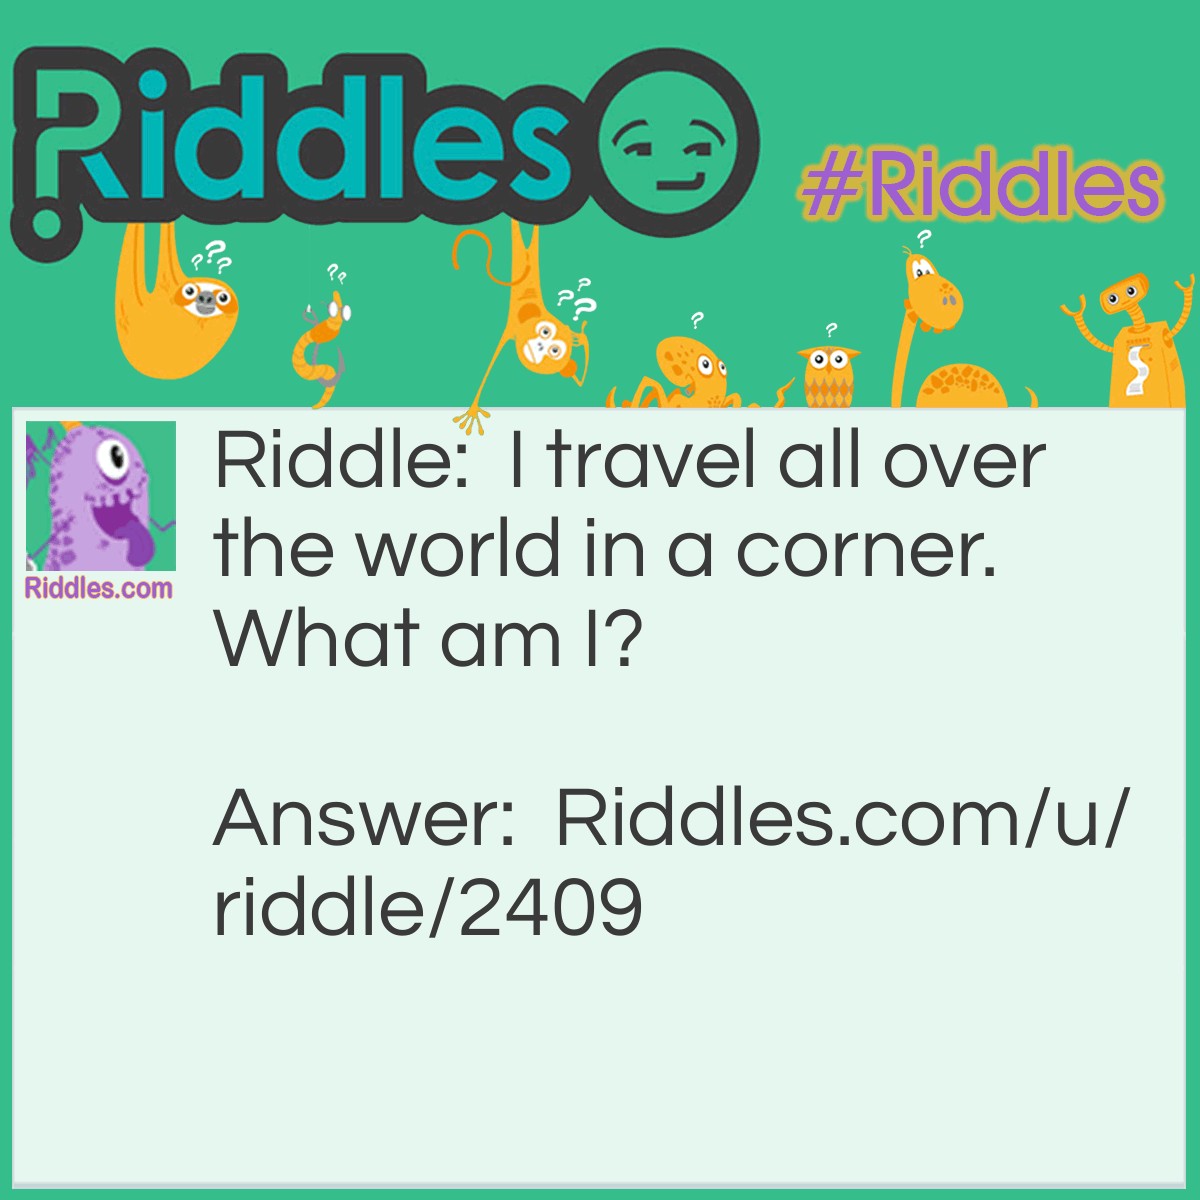 Riddle: I travel all over the world in a corner. What am I? Answer: I'm a stamp.